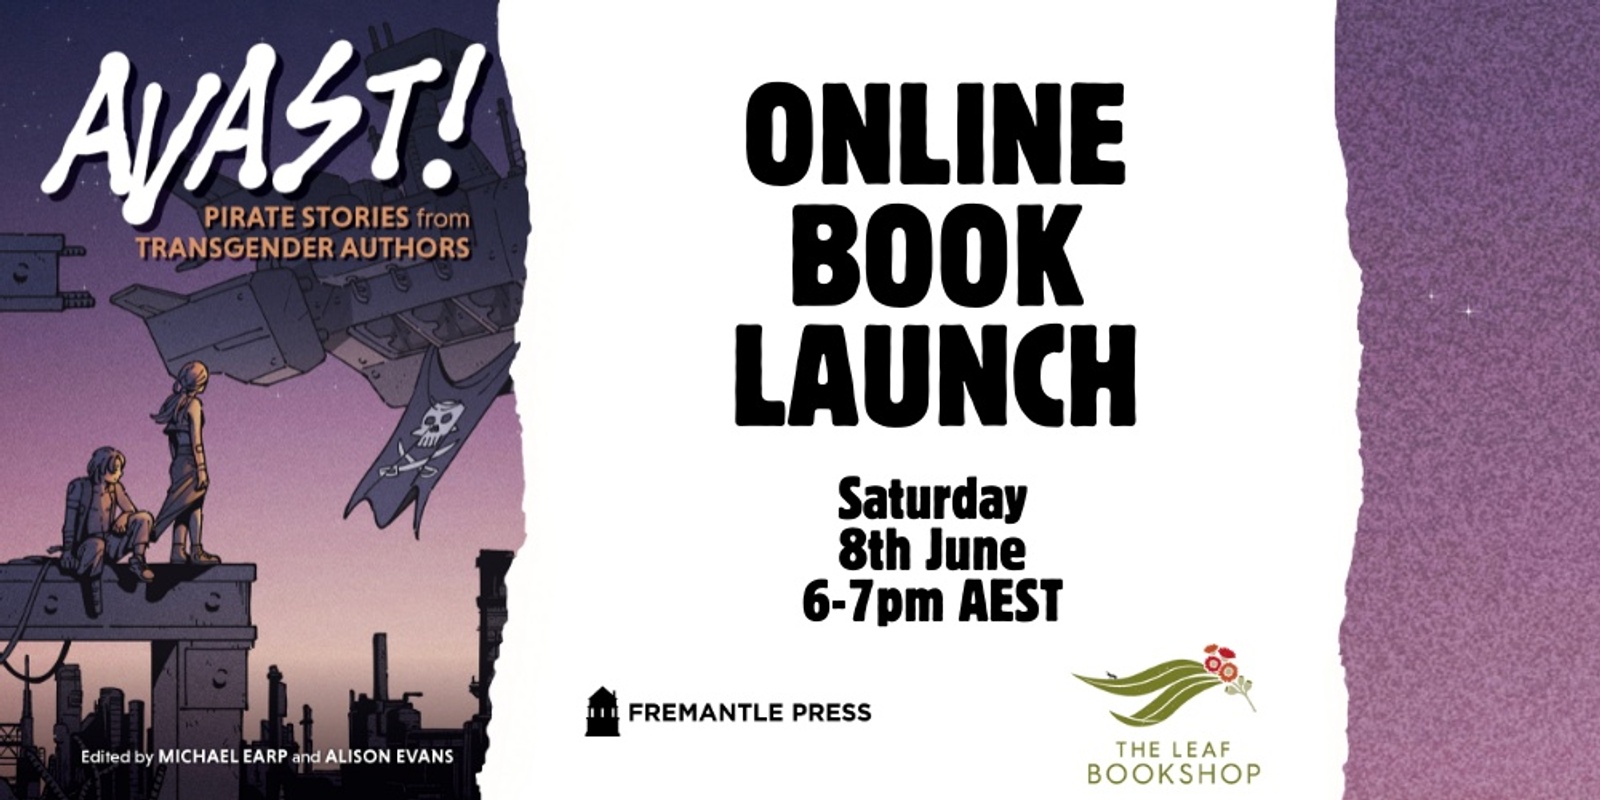 Banner image for Avast! Pirate Stories by Transgender Authors ONLINE BOOK LAUNCH!